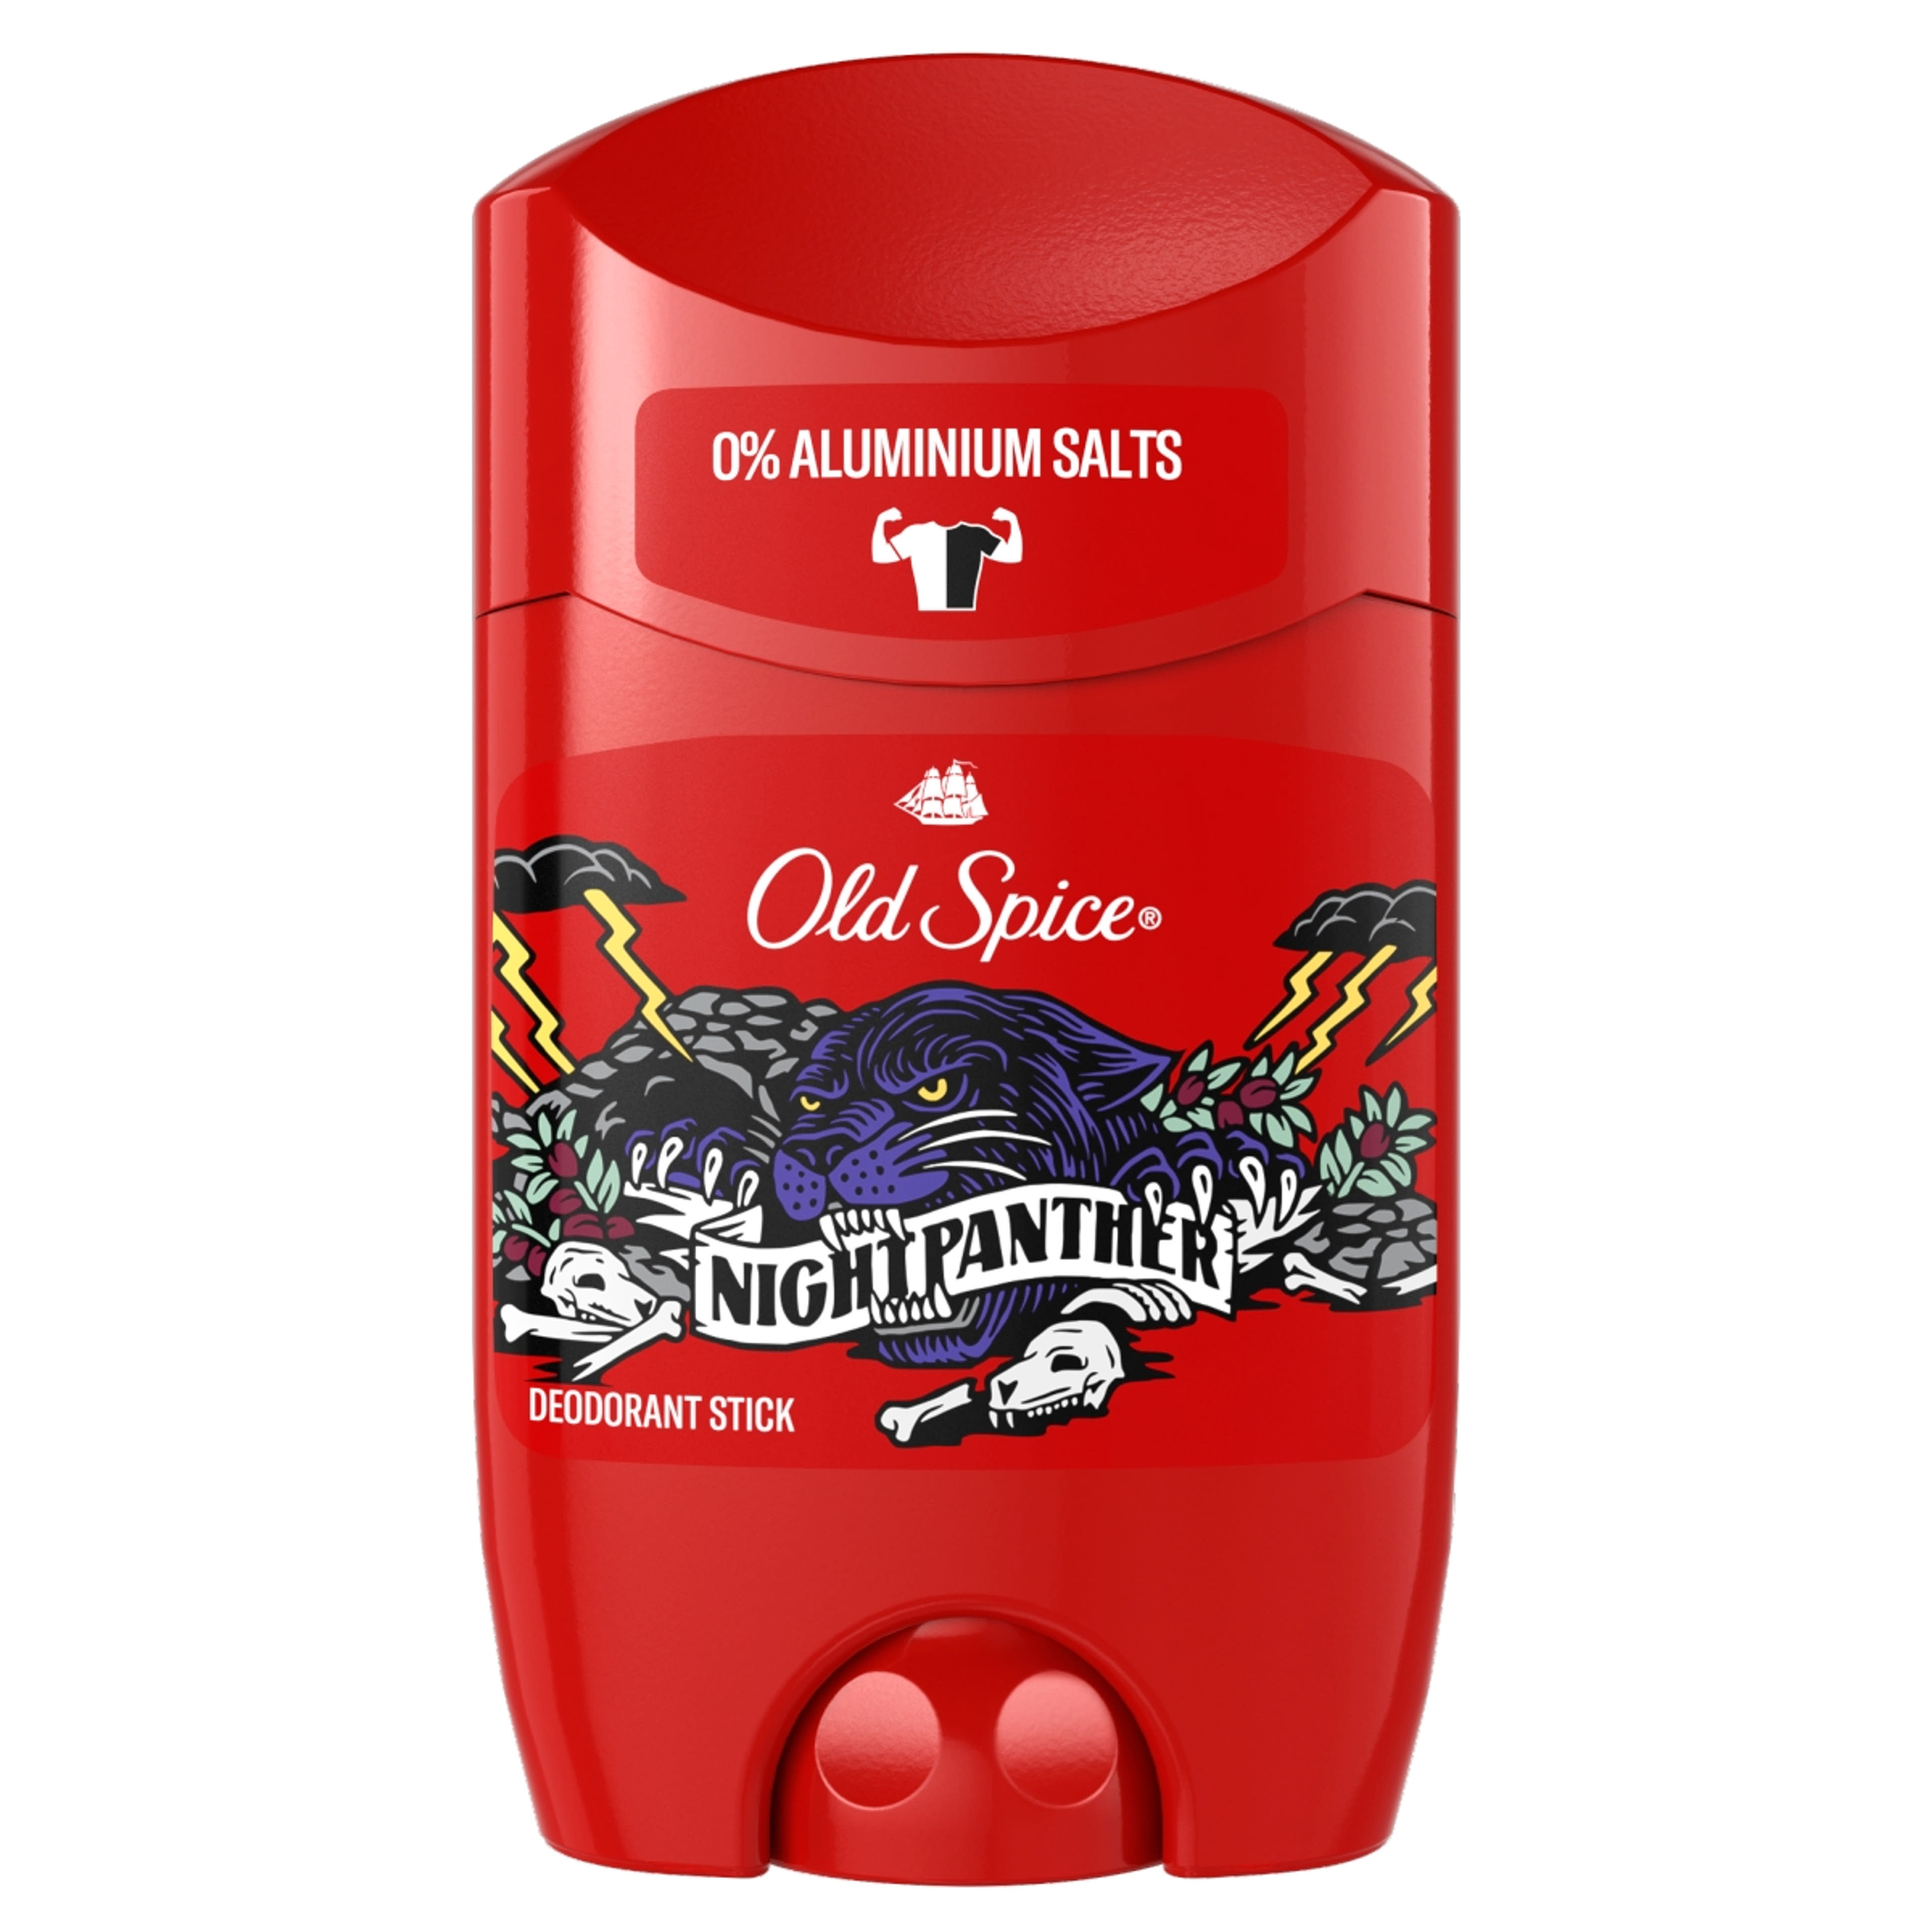 Old Spice Nightpanther deo stick - 50 ml